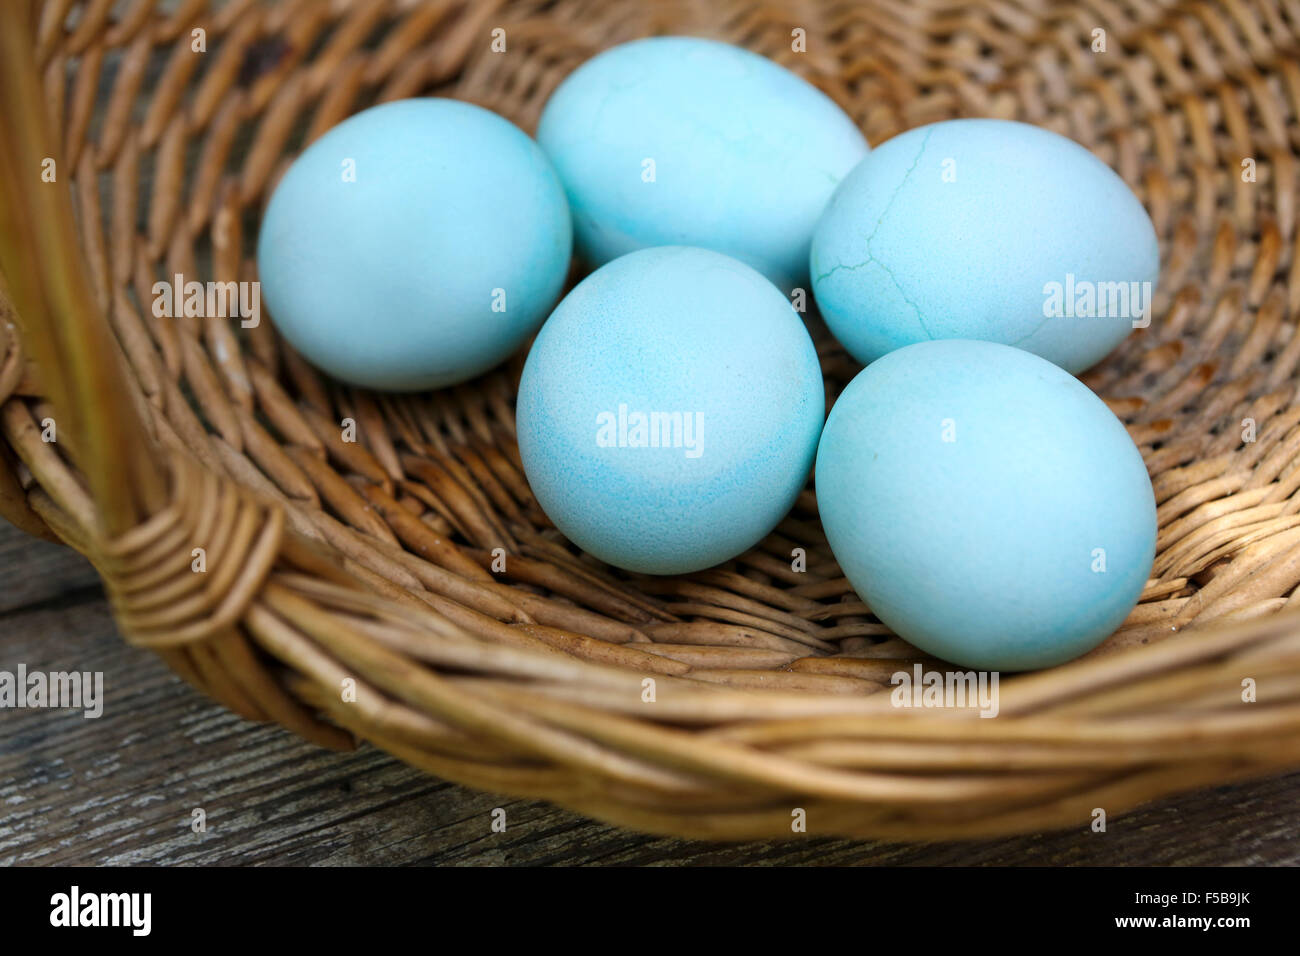 Blue hard boiled eggs a good start for Easter eggs (dyed with beetroot) This image has a restriction for licensing in Israel Stock Photo